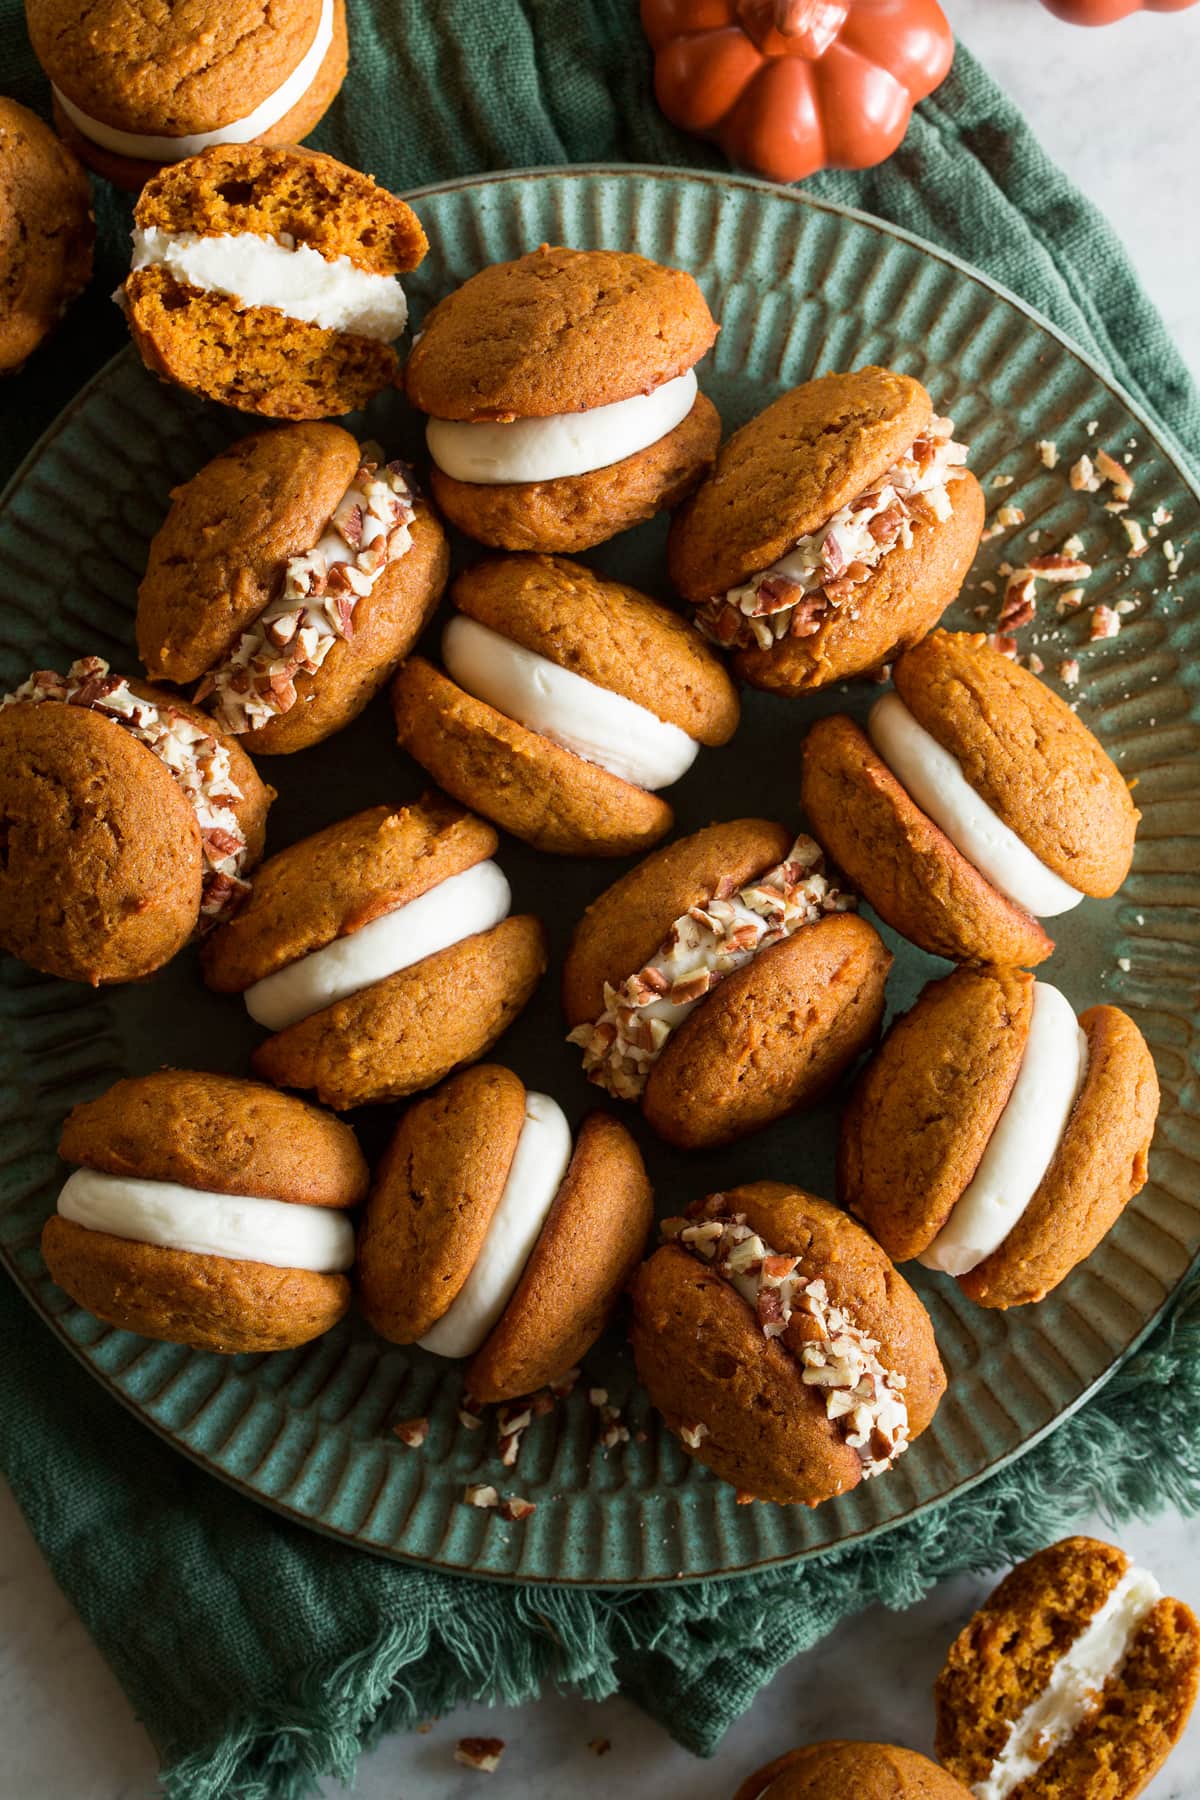 Pumpkin whoopie pies shown overhead on a large turquoise plate.